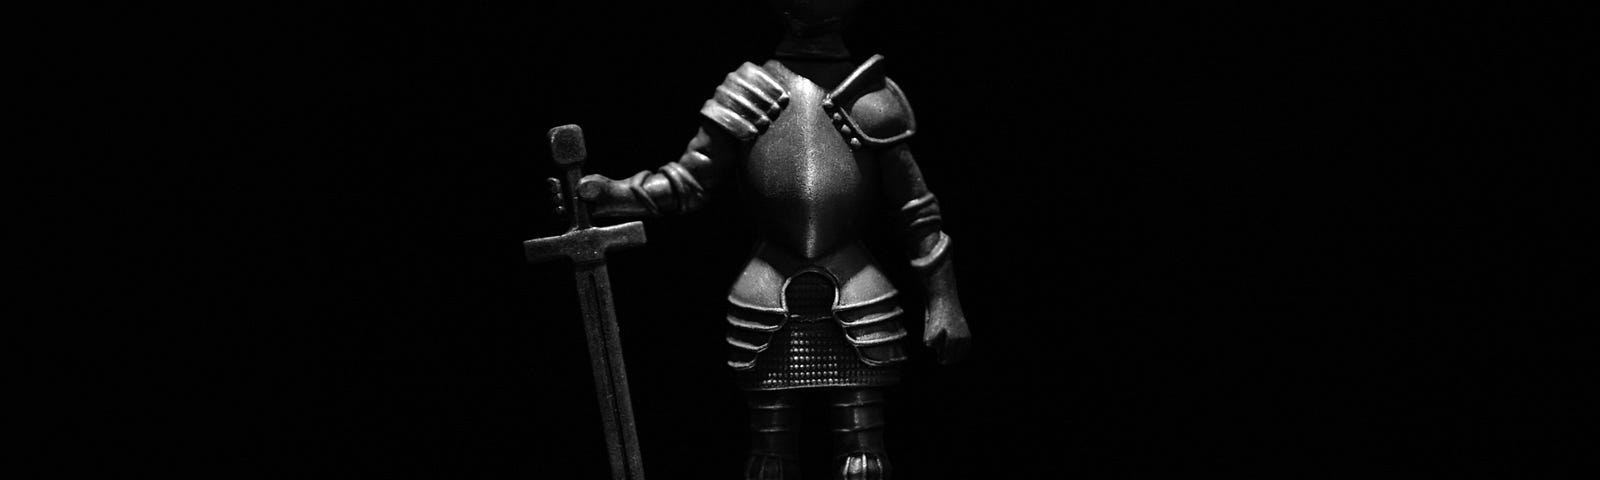 A statuette of a fully armored knight holding a sword point-down